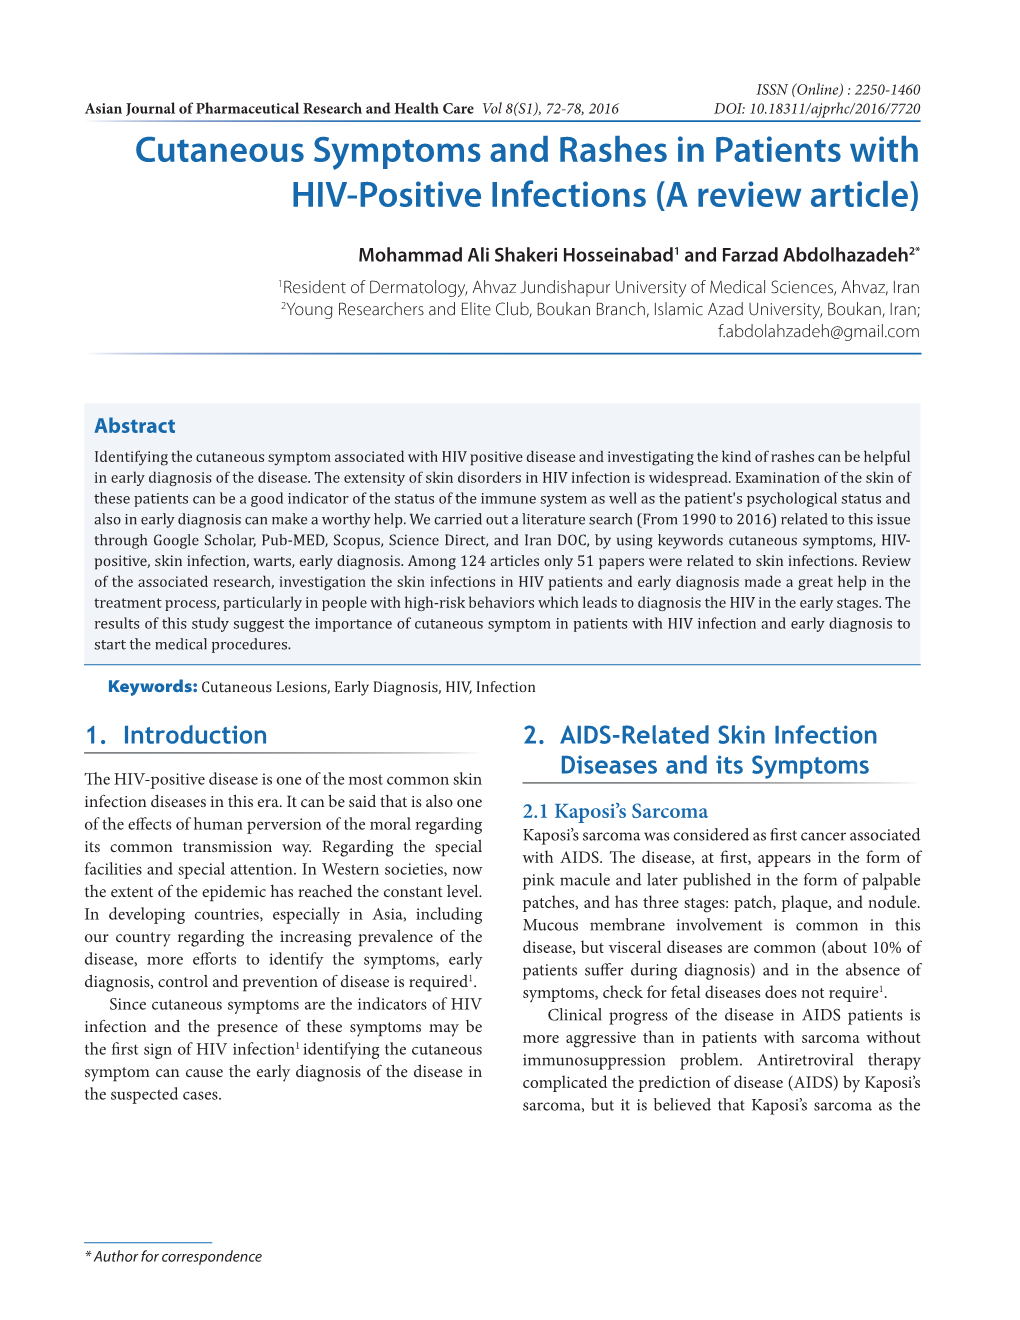 Cutaneous Symptoms and Rashes in Patients with HIV-Positive Infections (A Review Article)